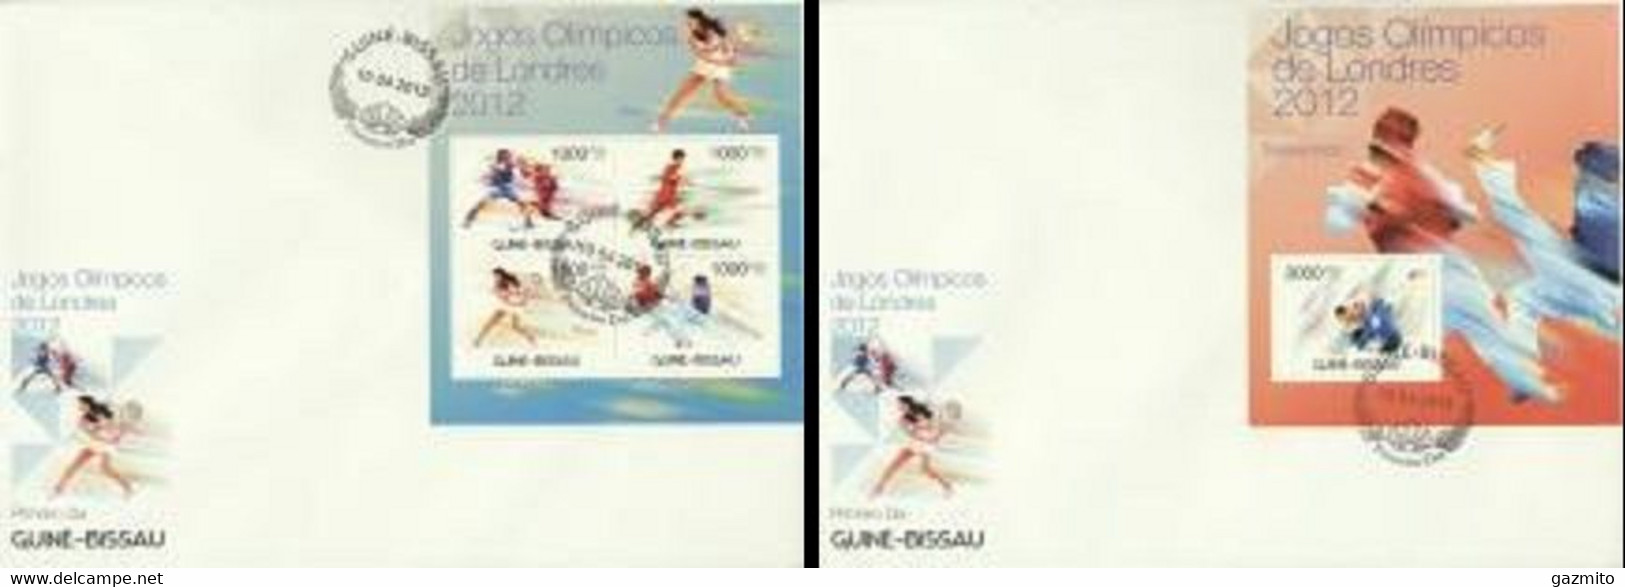 Guinea Bissau 2012, Olympic Games In London, Taekwondo, 4val In BF +BF IMPERFORATED In 2FDC - Non Classés